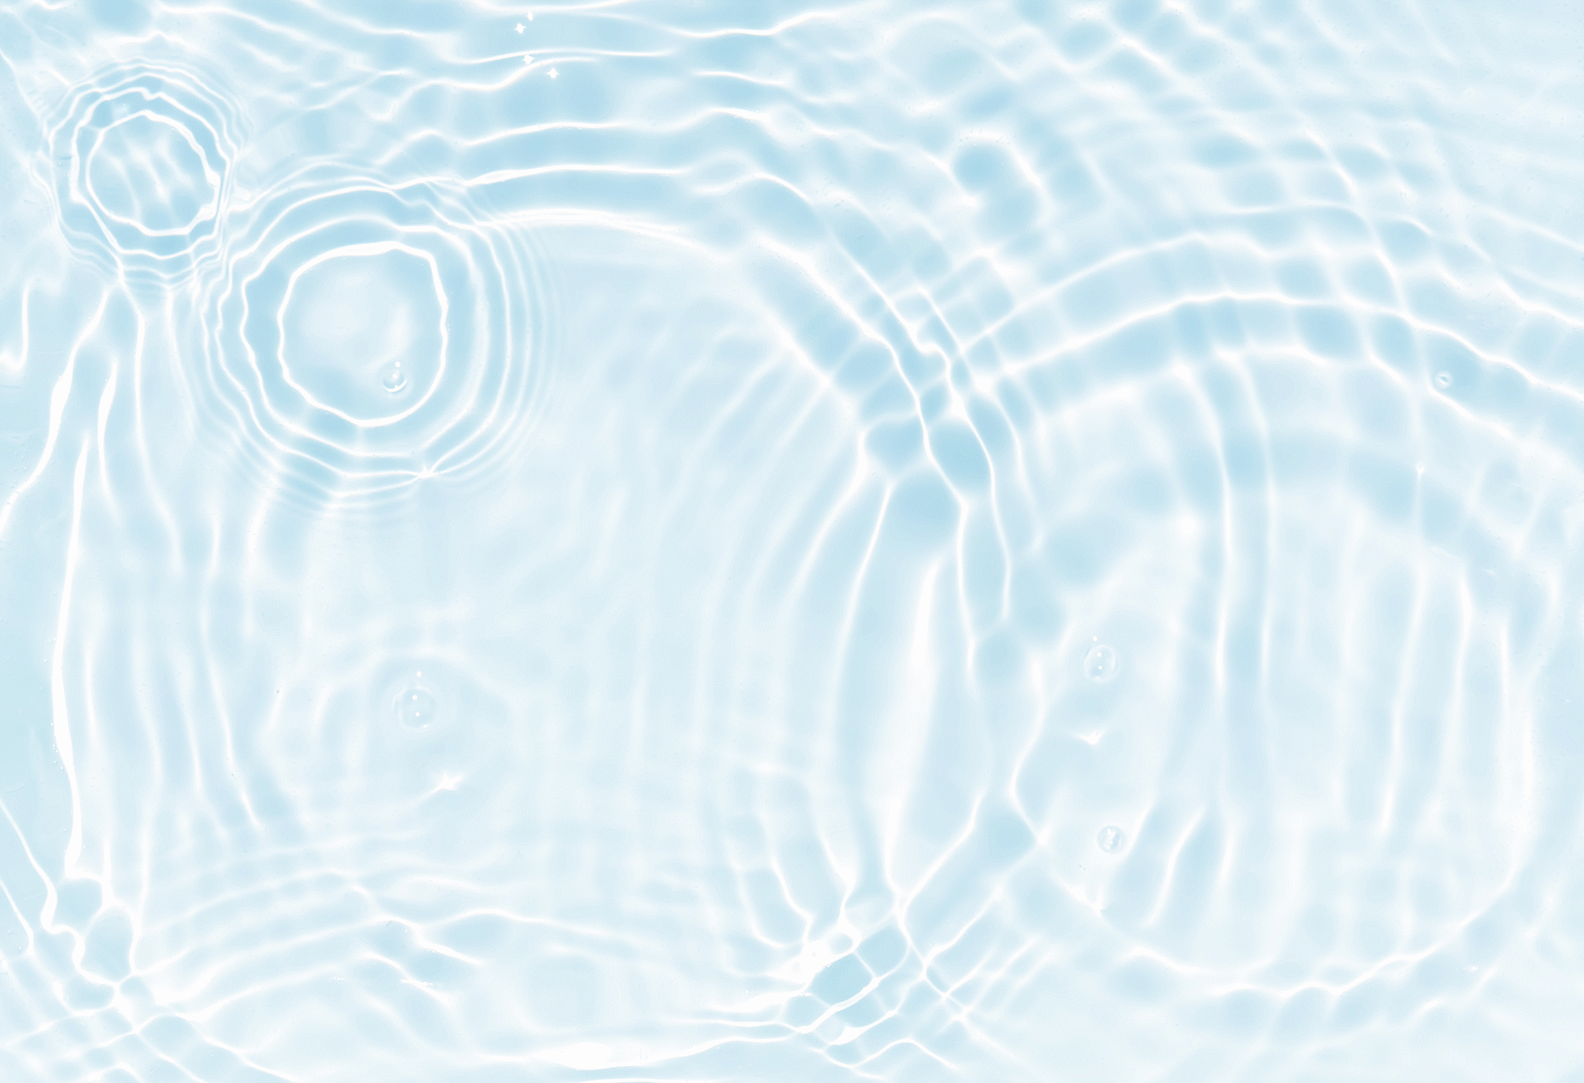 Image of water with ripples